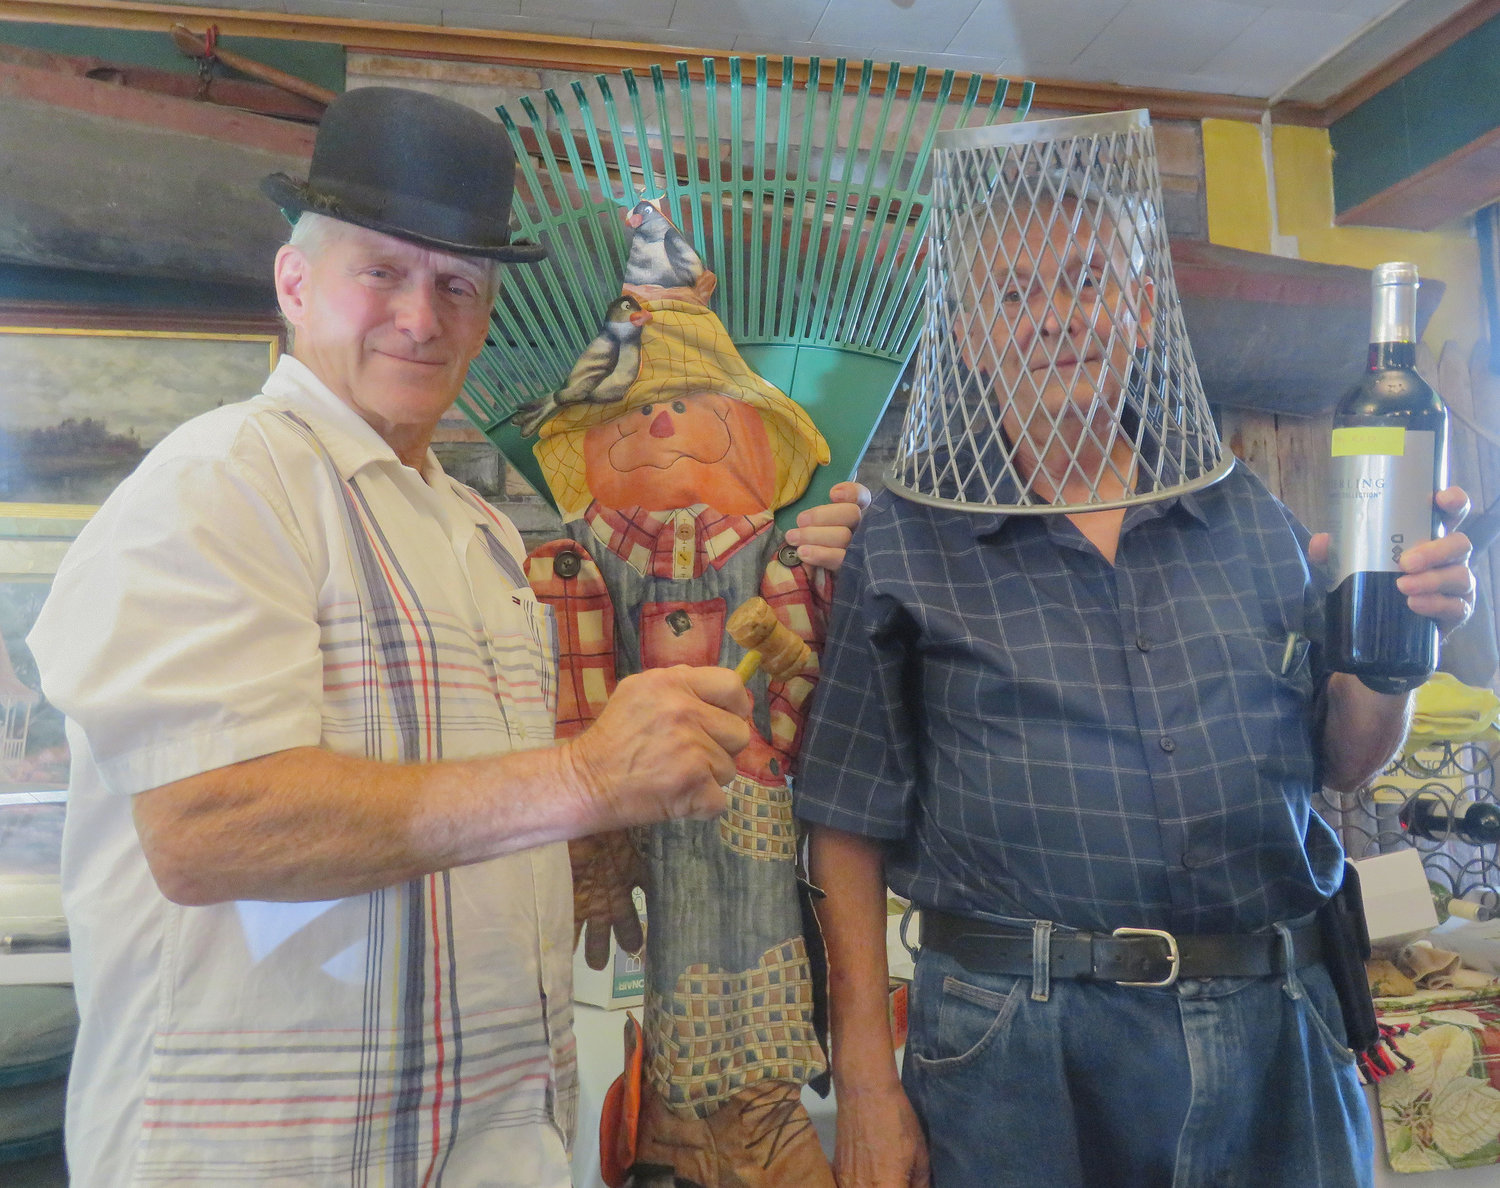 On Aug. 4, the Oriska Valley Seniors met at Quack's Village Inn in Madison for lunch followed by the annual auction of items brought in by members.  Entree choices for the BBQ luncheon were pulled pork, chicken fingers or cheeseburgers. Eric Howard and Mike Silliman conducted the auction. Pictured: Eric Howard, left, Mike Silliman.